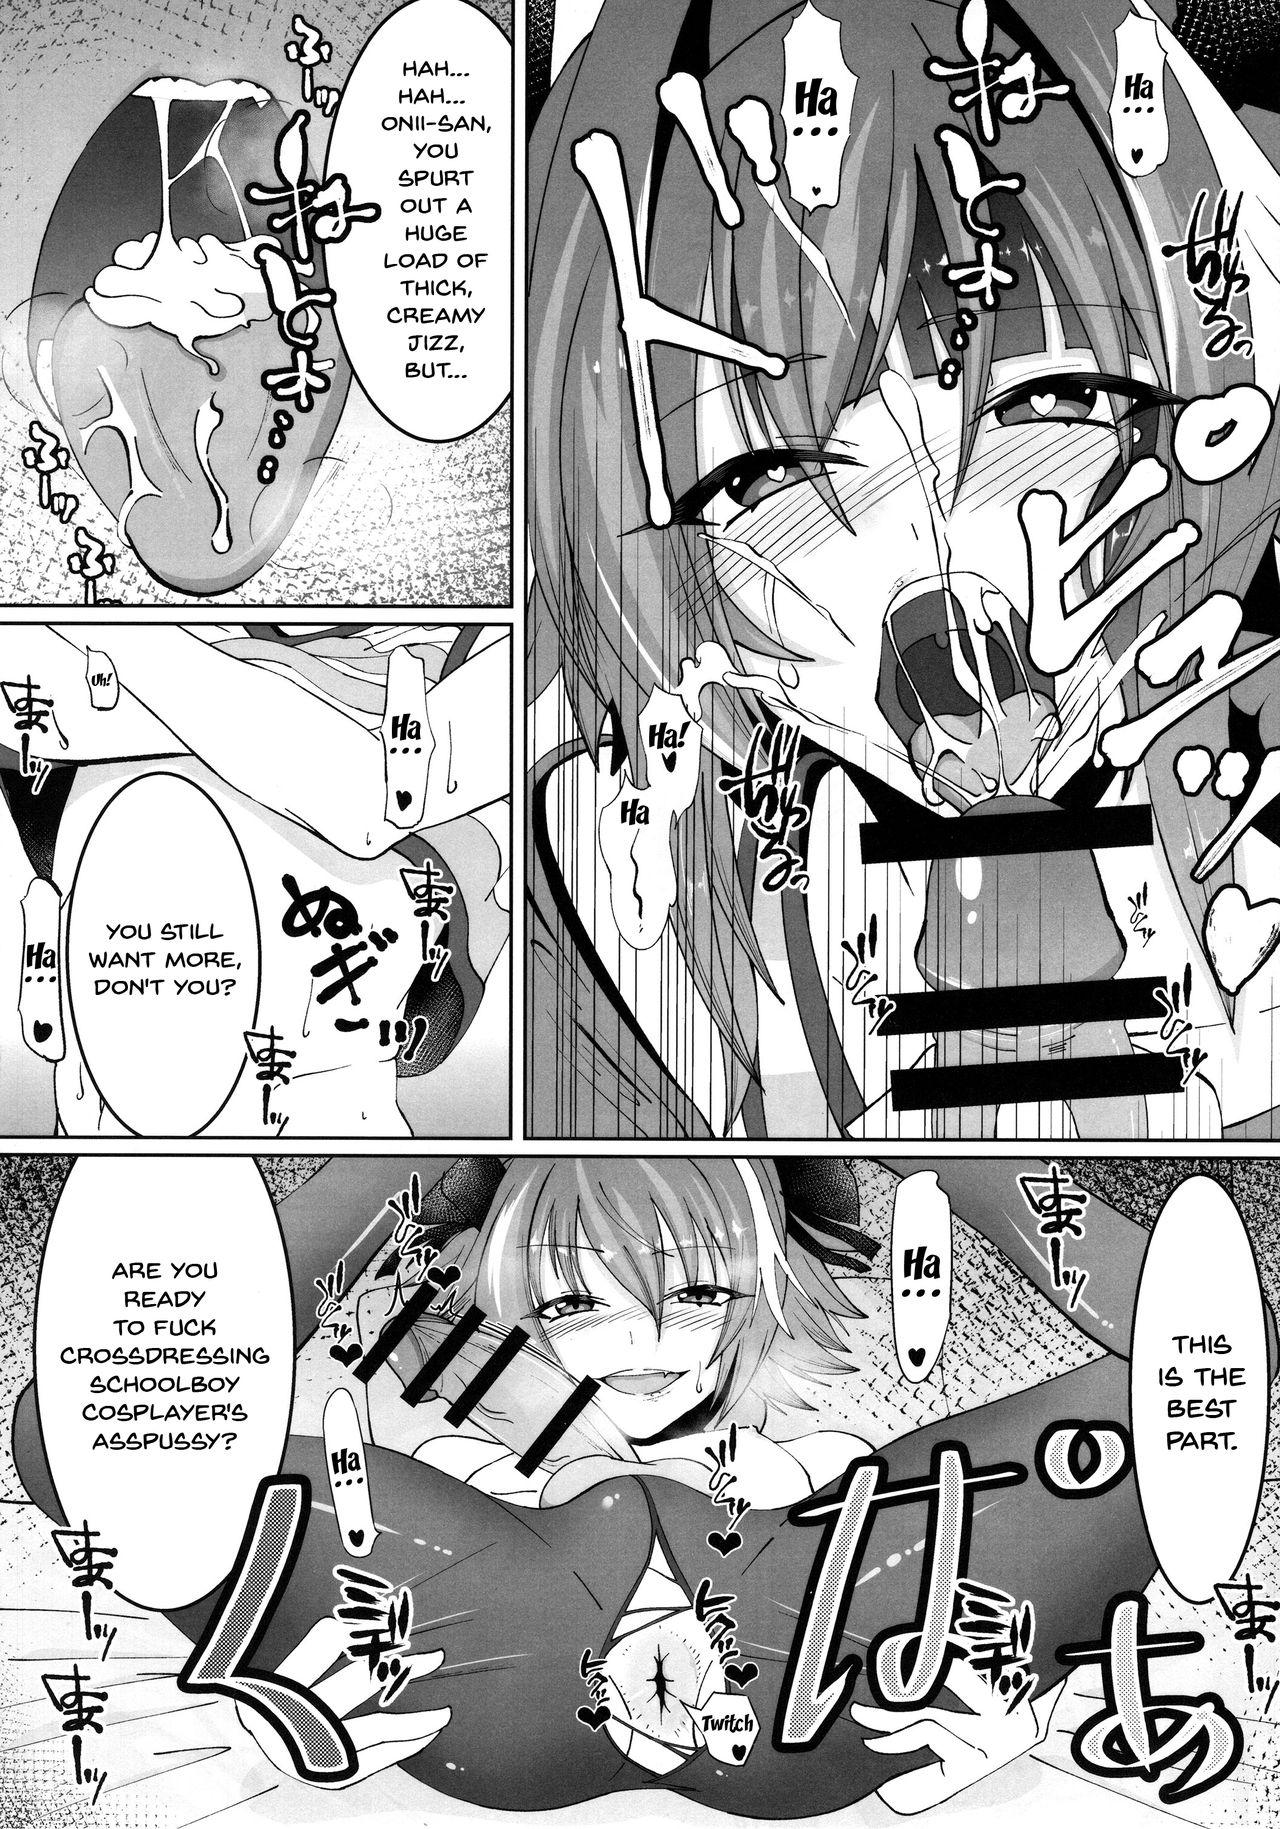 Wank Deal With The Devil - Fate grand order Sola - Page 9